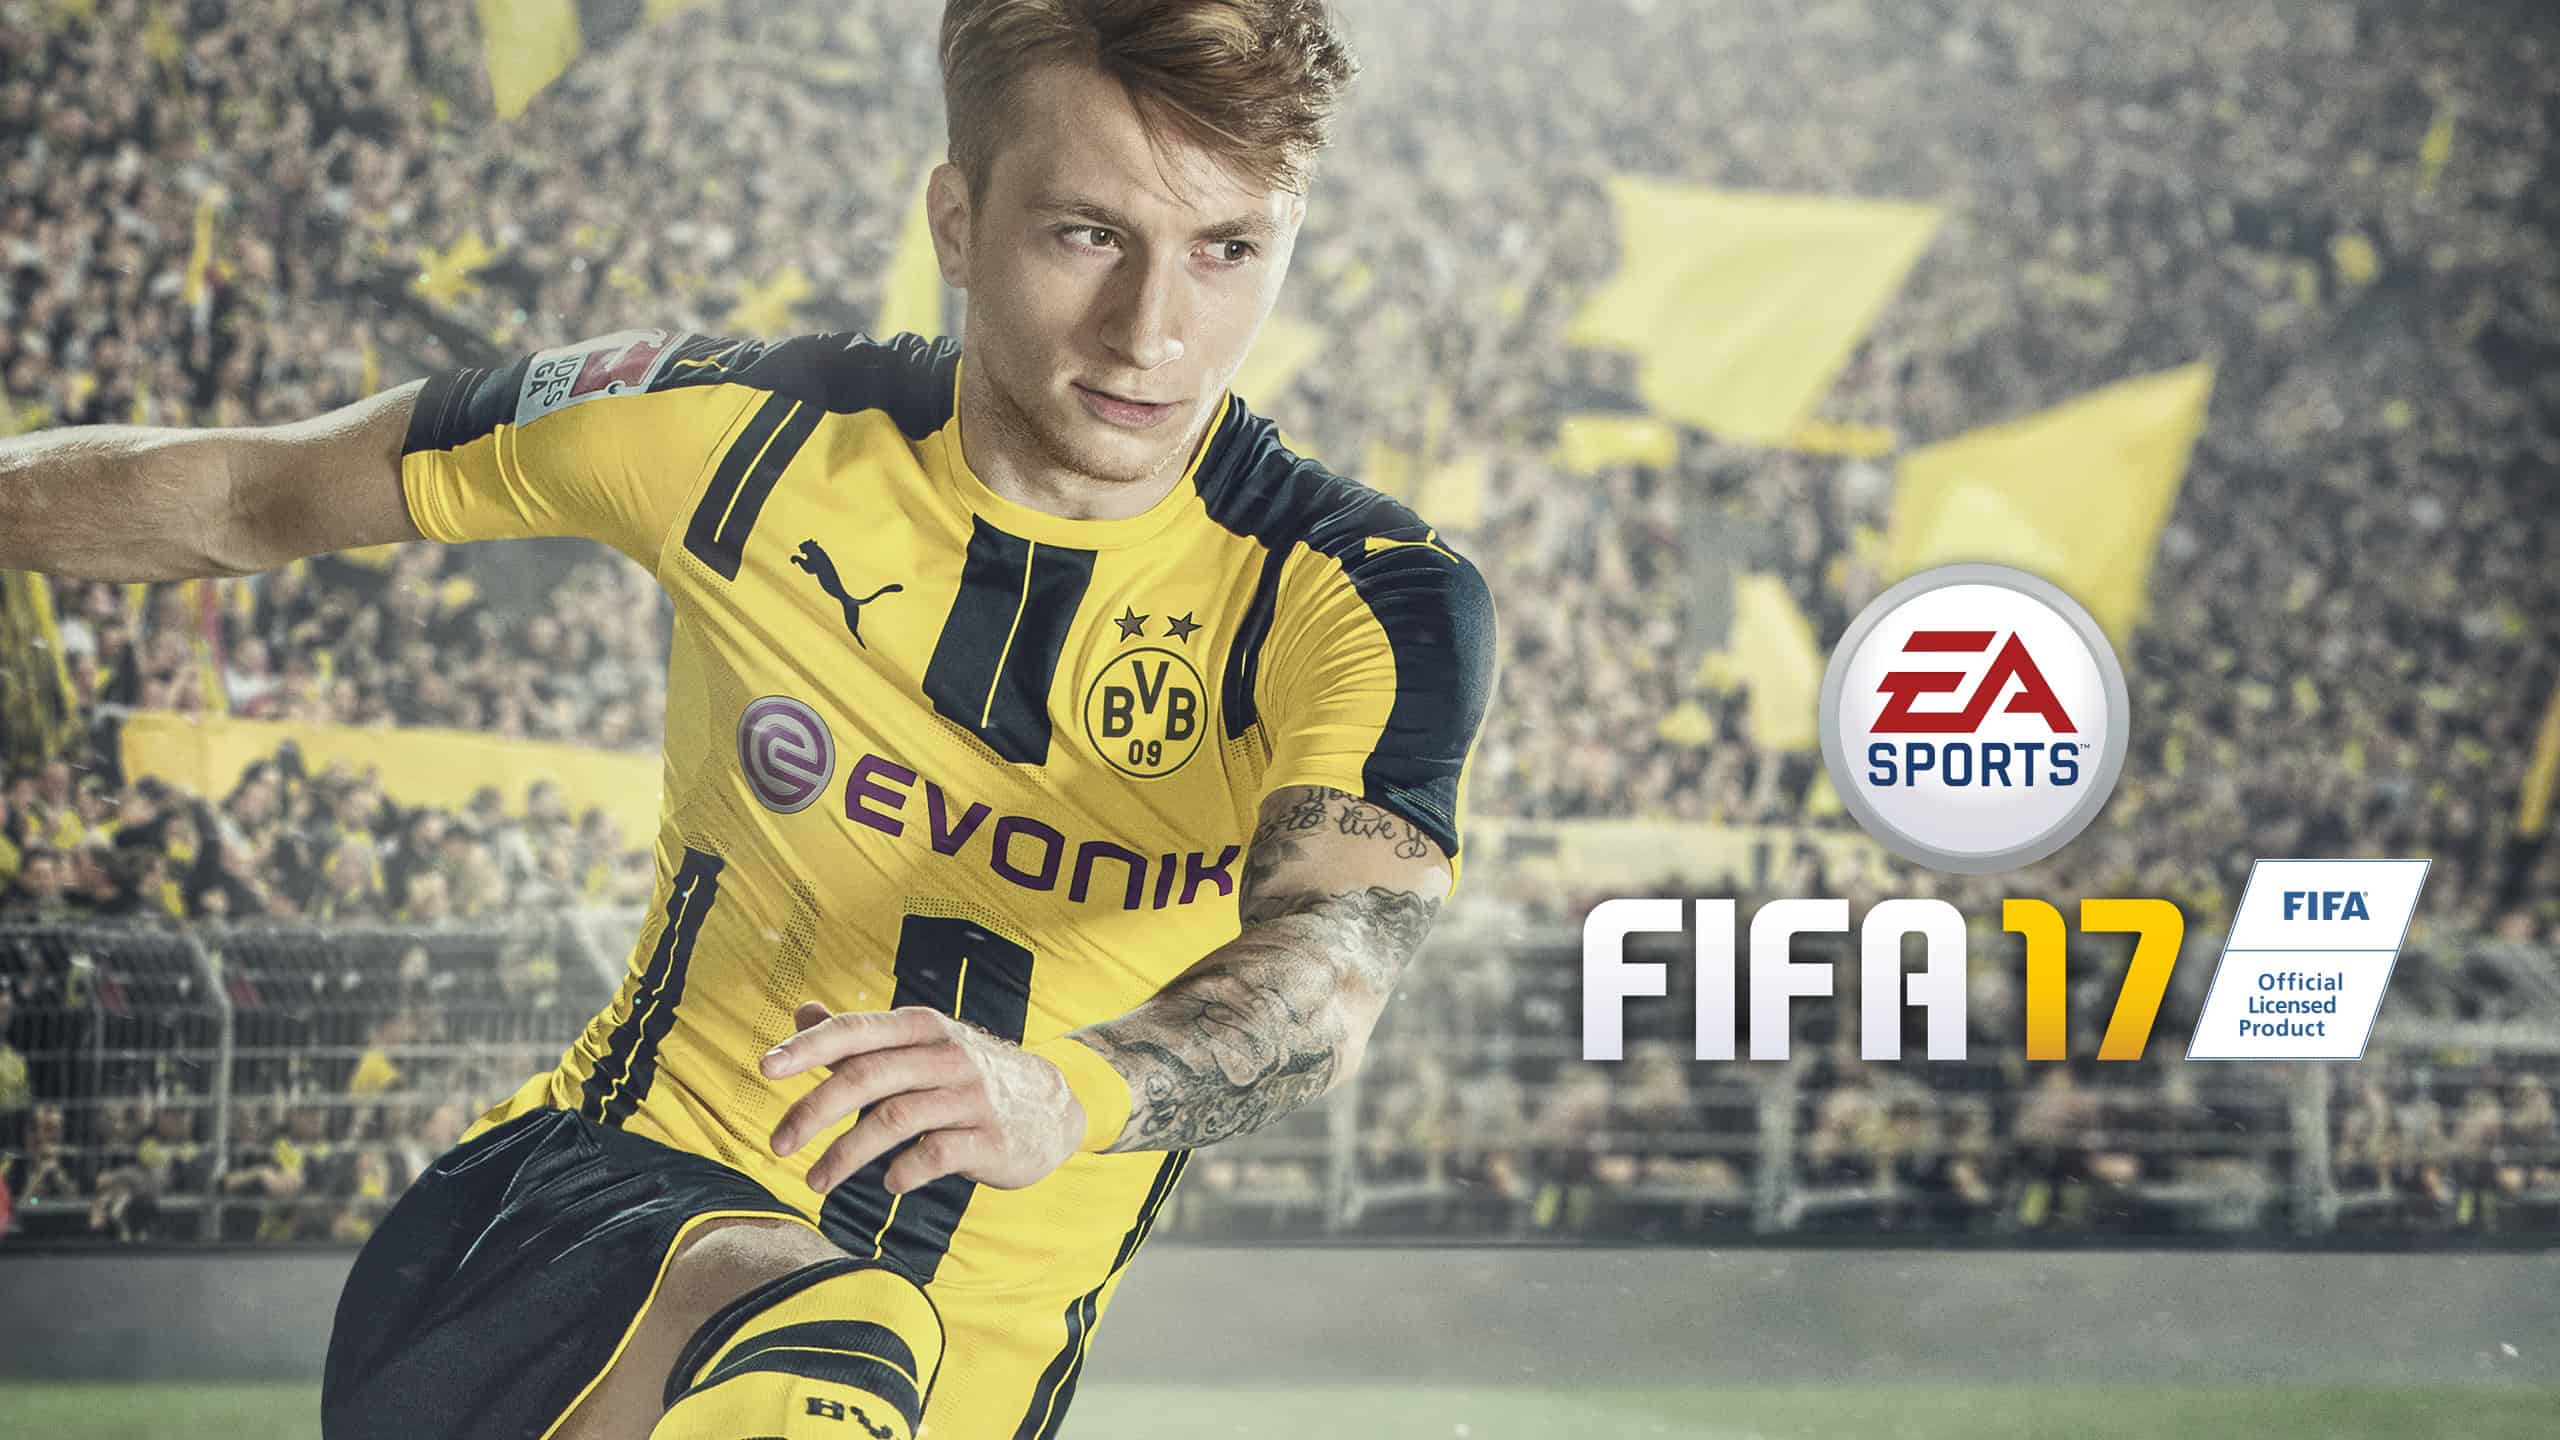 Best Selling PS4 Games - Fifa 17